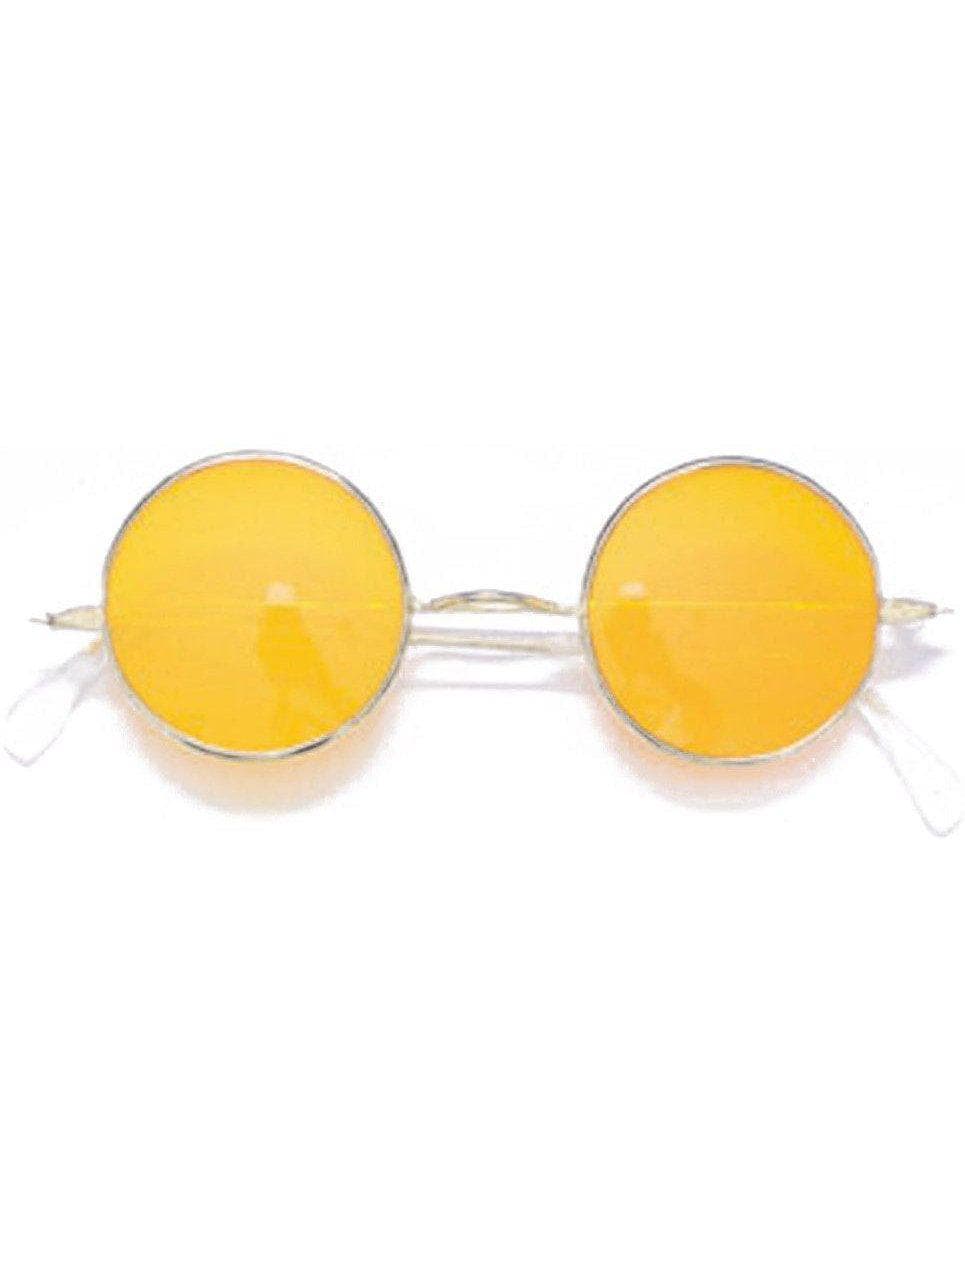 Kids' Colored Lens Feelin' Groovy Round Glasses - costumes.com